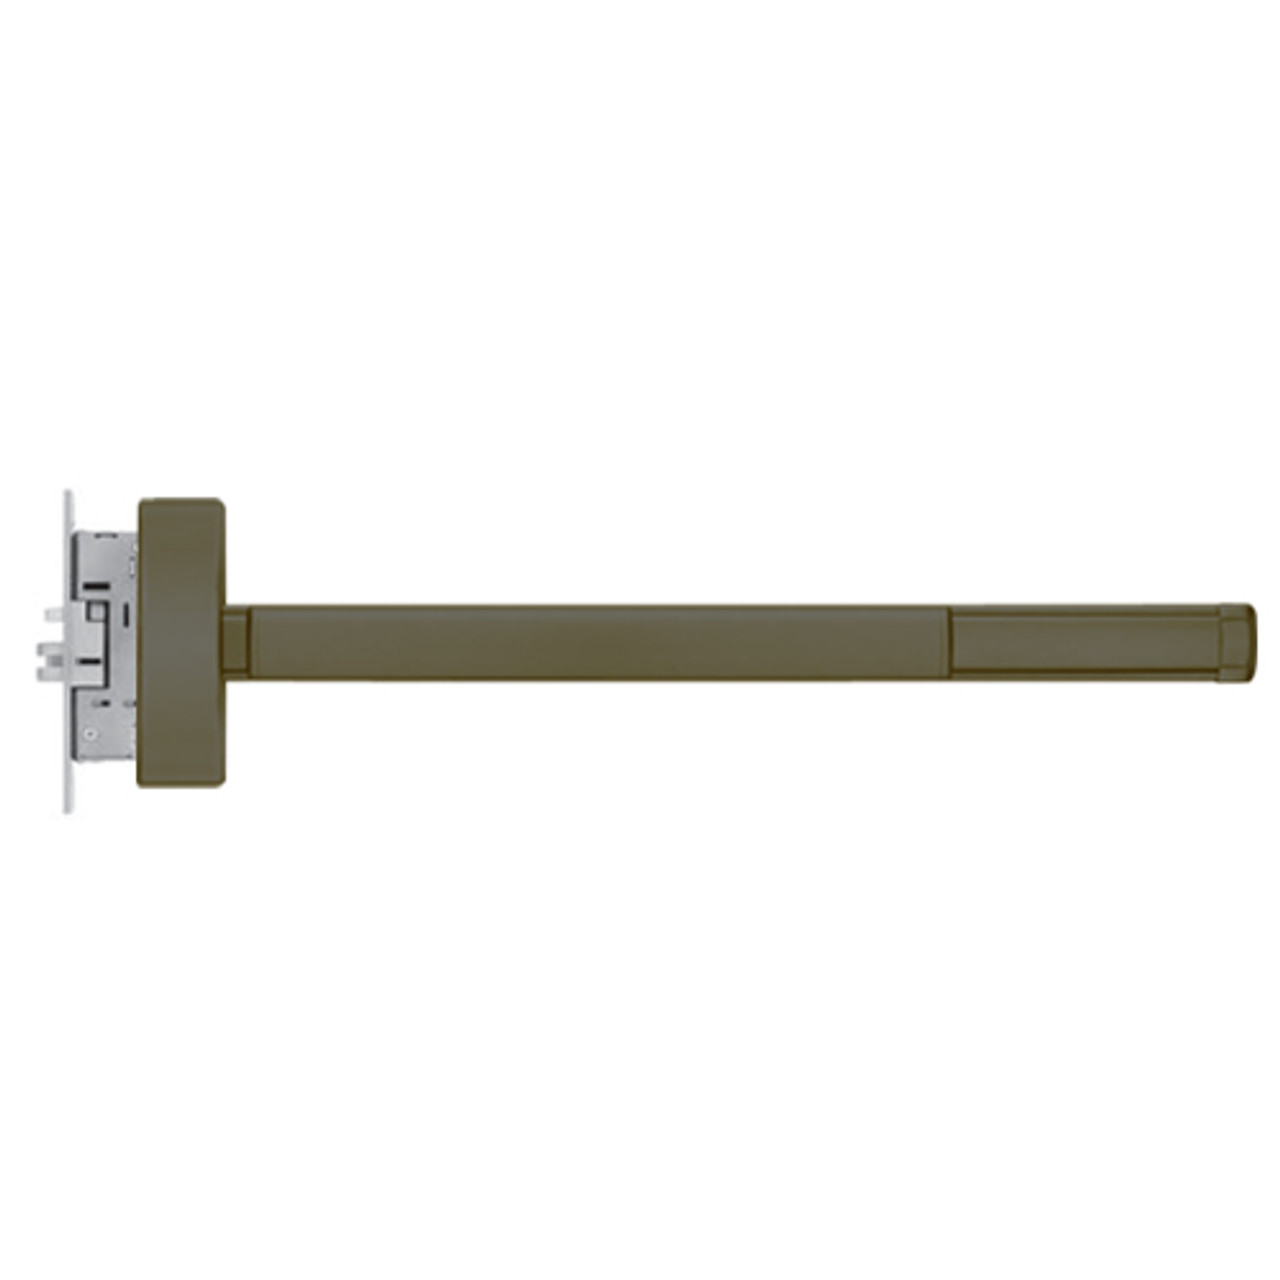 TS2303-RHR-613-48 PHI 2300 Series Apex Mortise Exit Device with Touchbar Monitoring Switch Prepped for Key Retracts Latchbolt in Oil Rubbed Bronze Finish